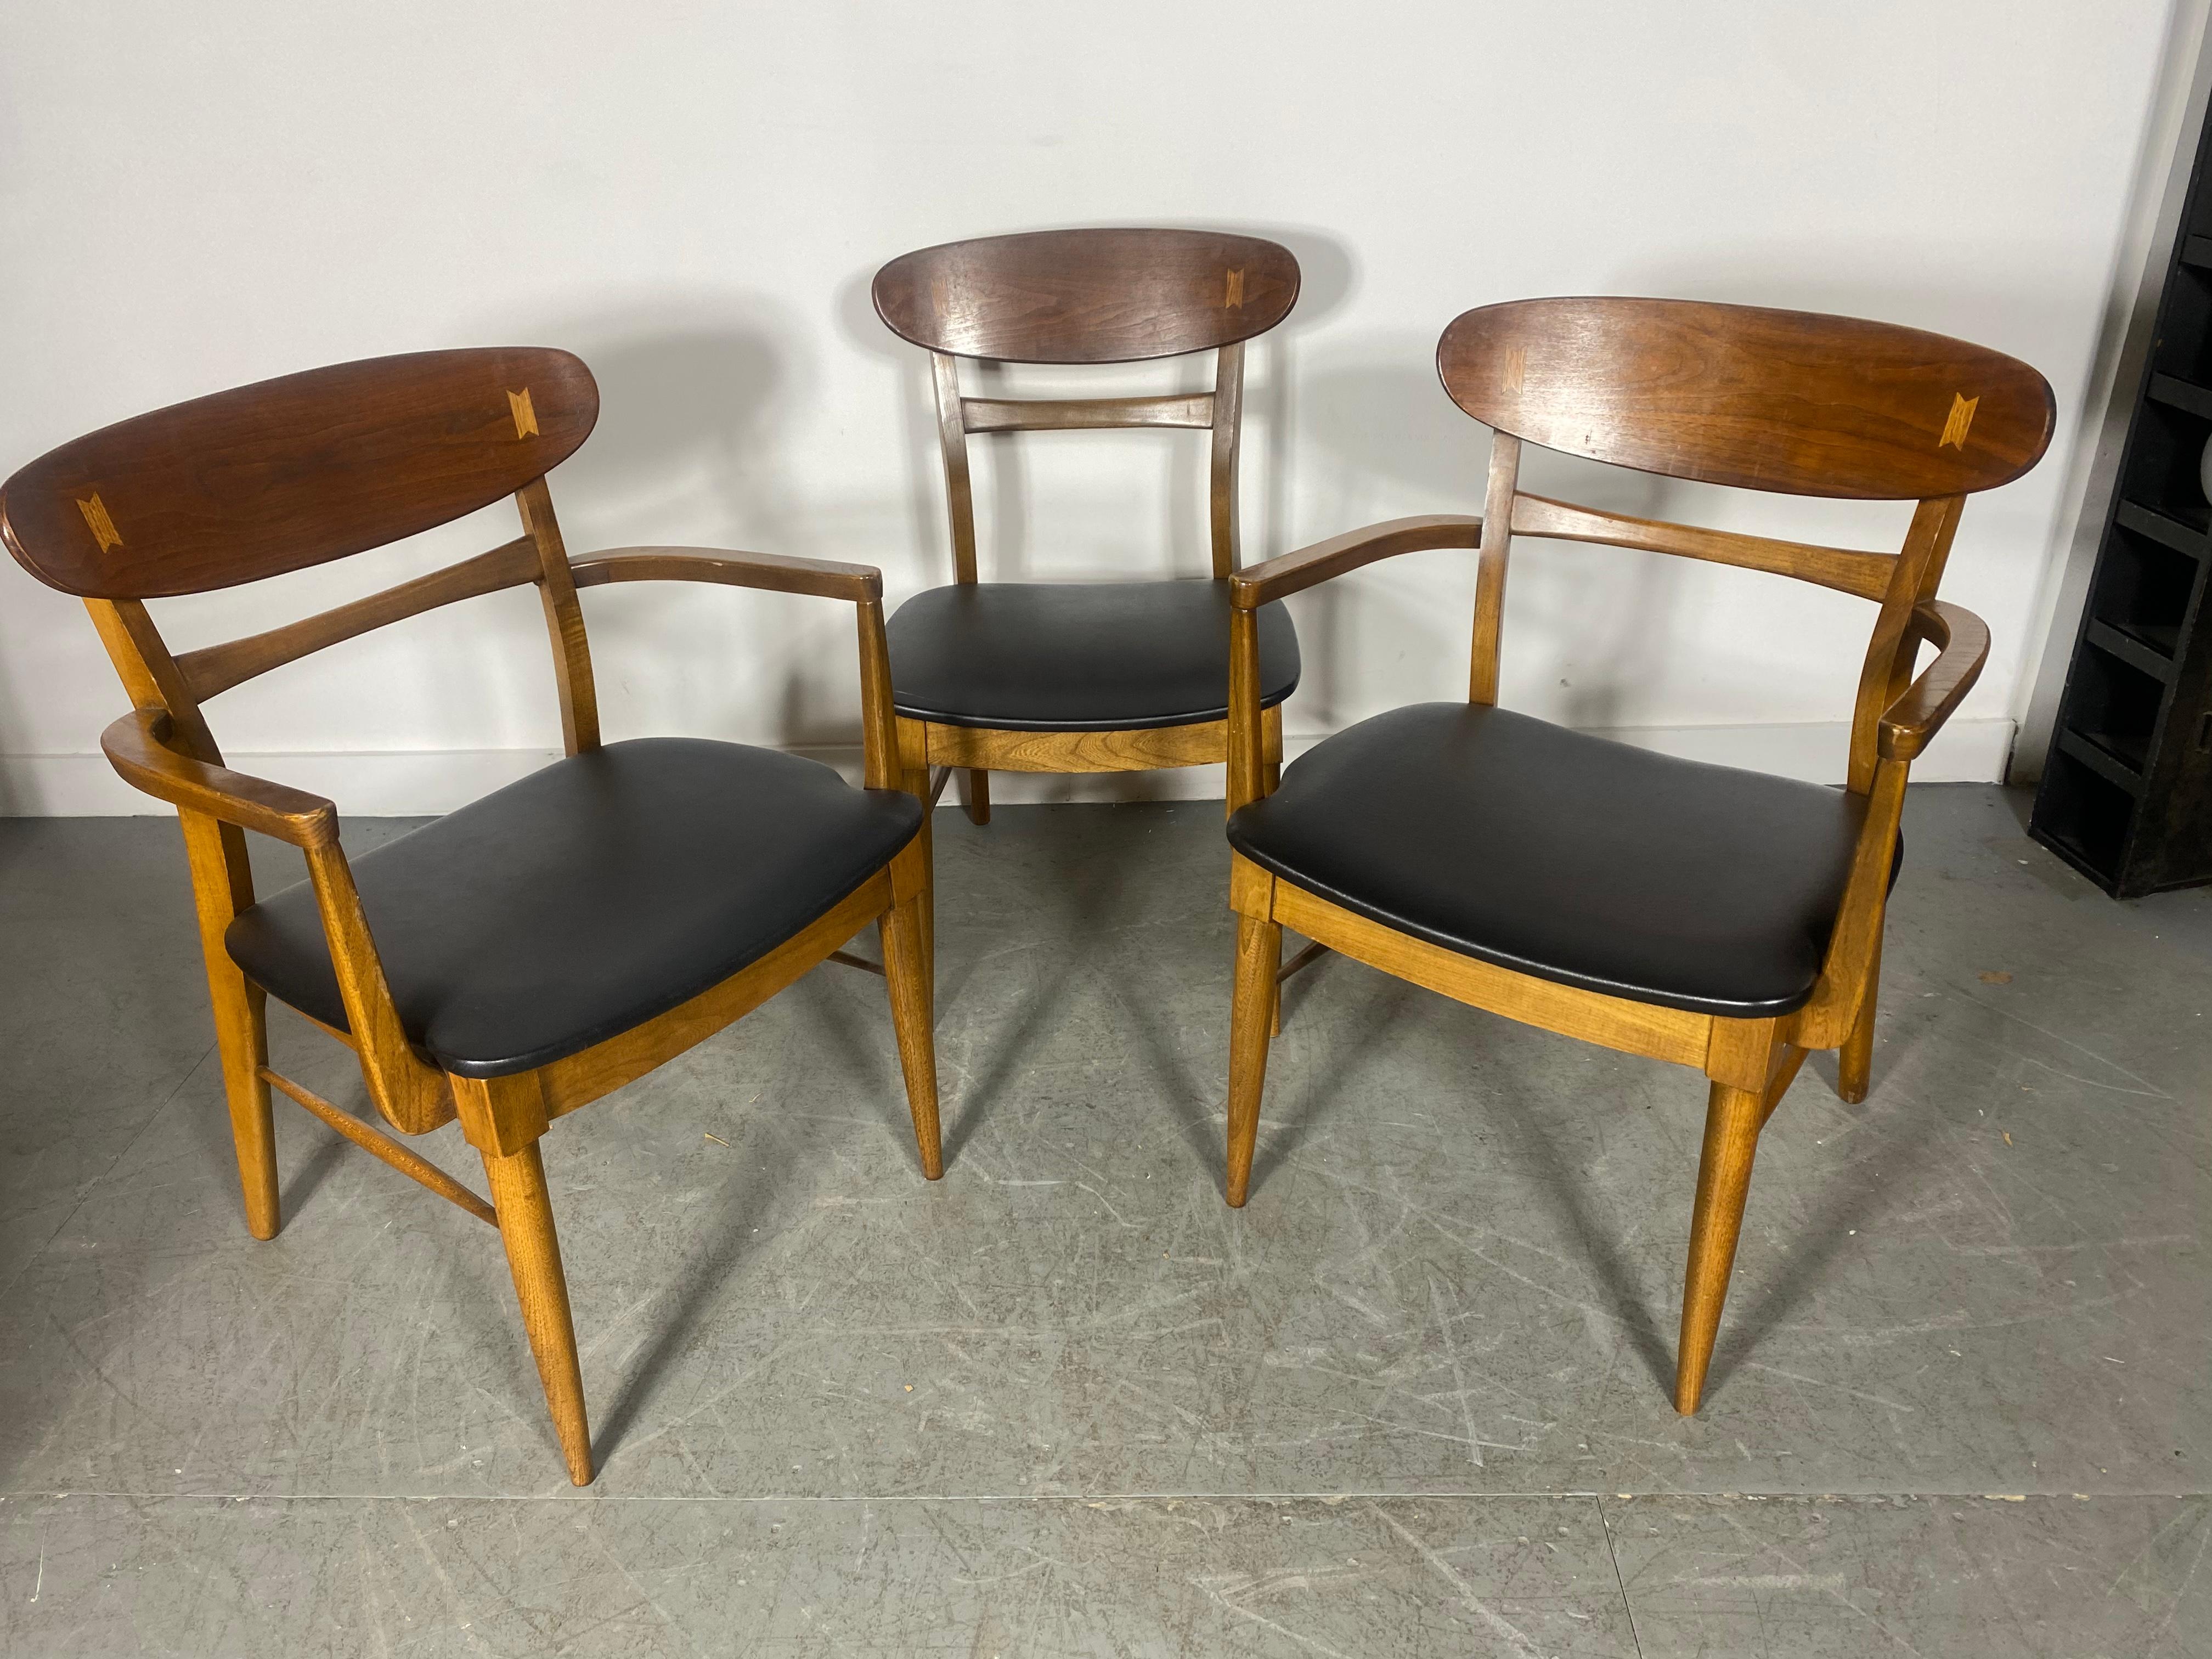 American Midcentury Sculpted Back Dining Chairs Andre Bus for Lane Acclaim Set of 8 For Sale